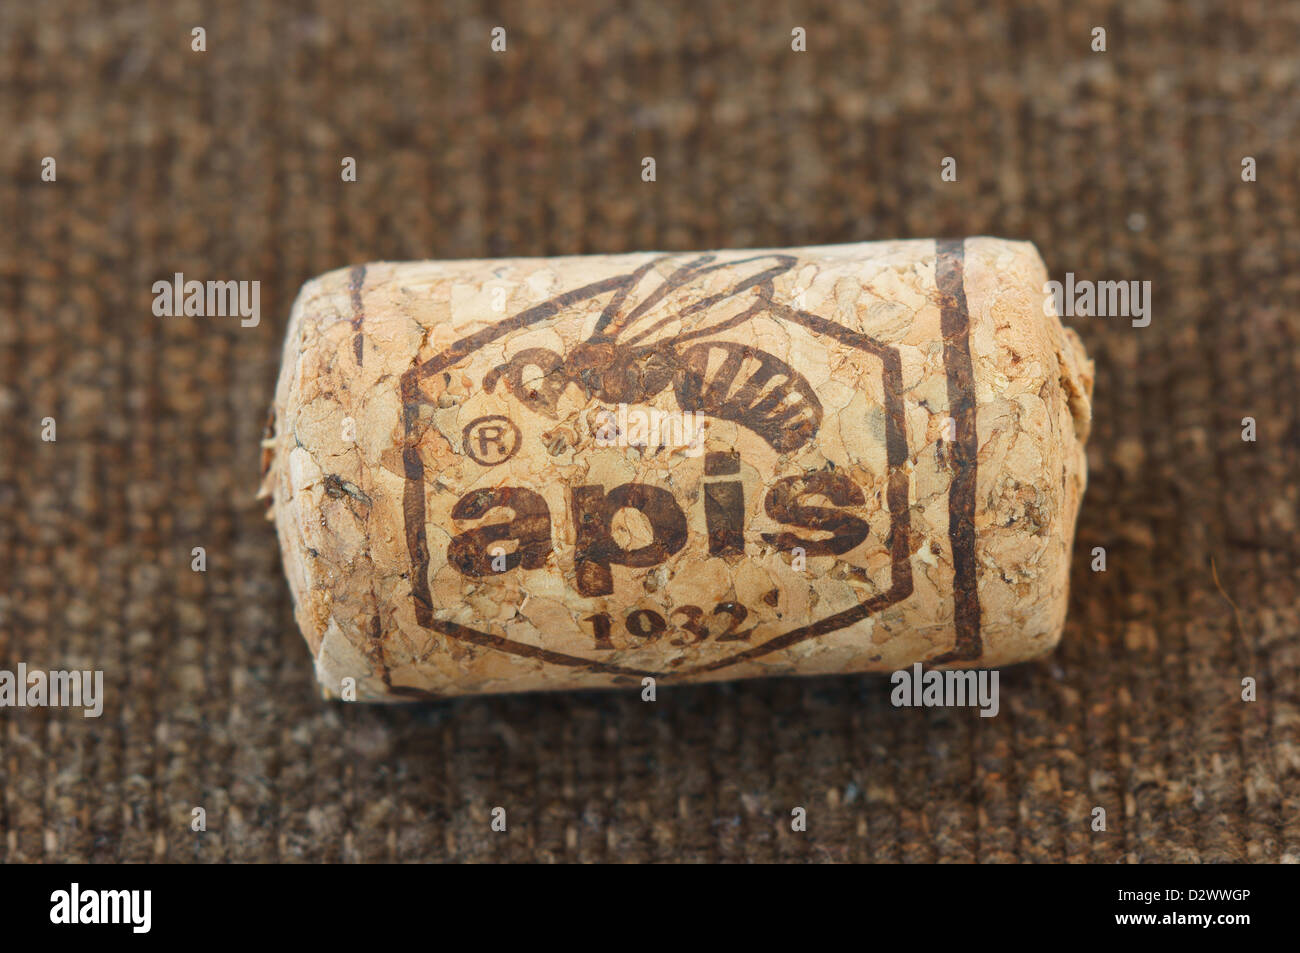 Mead cork stopper with Apis logo polish finest mead honey producer Stock Photo